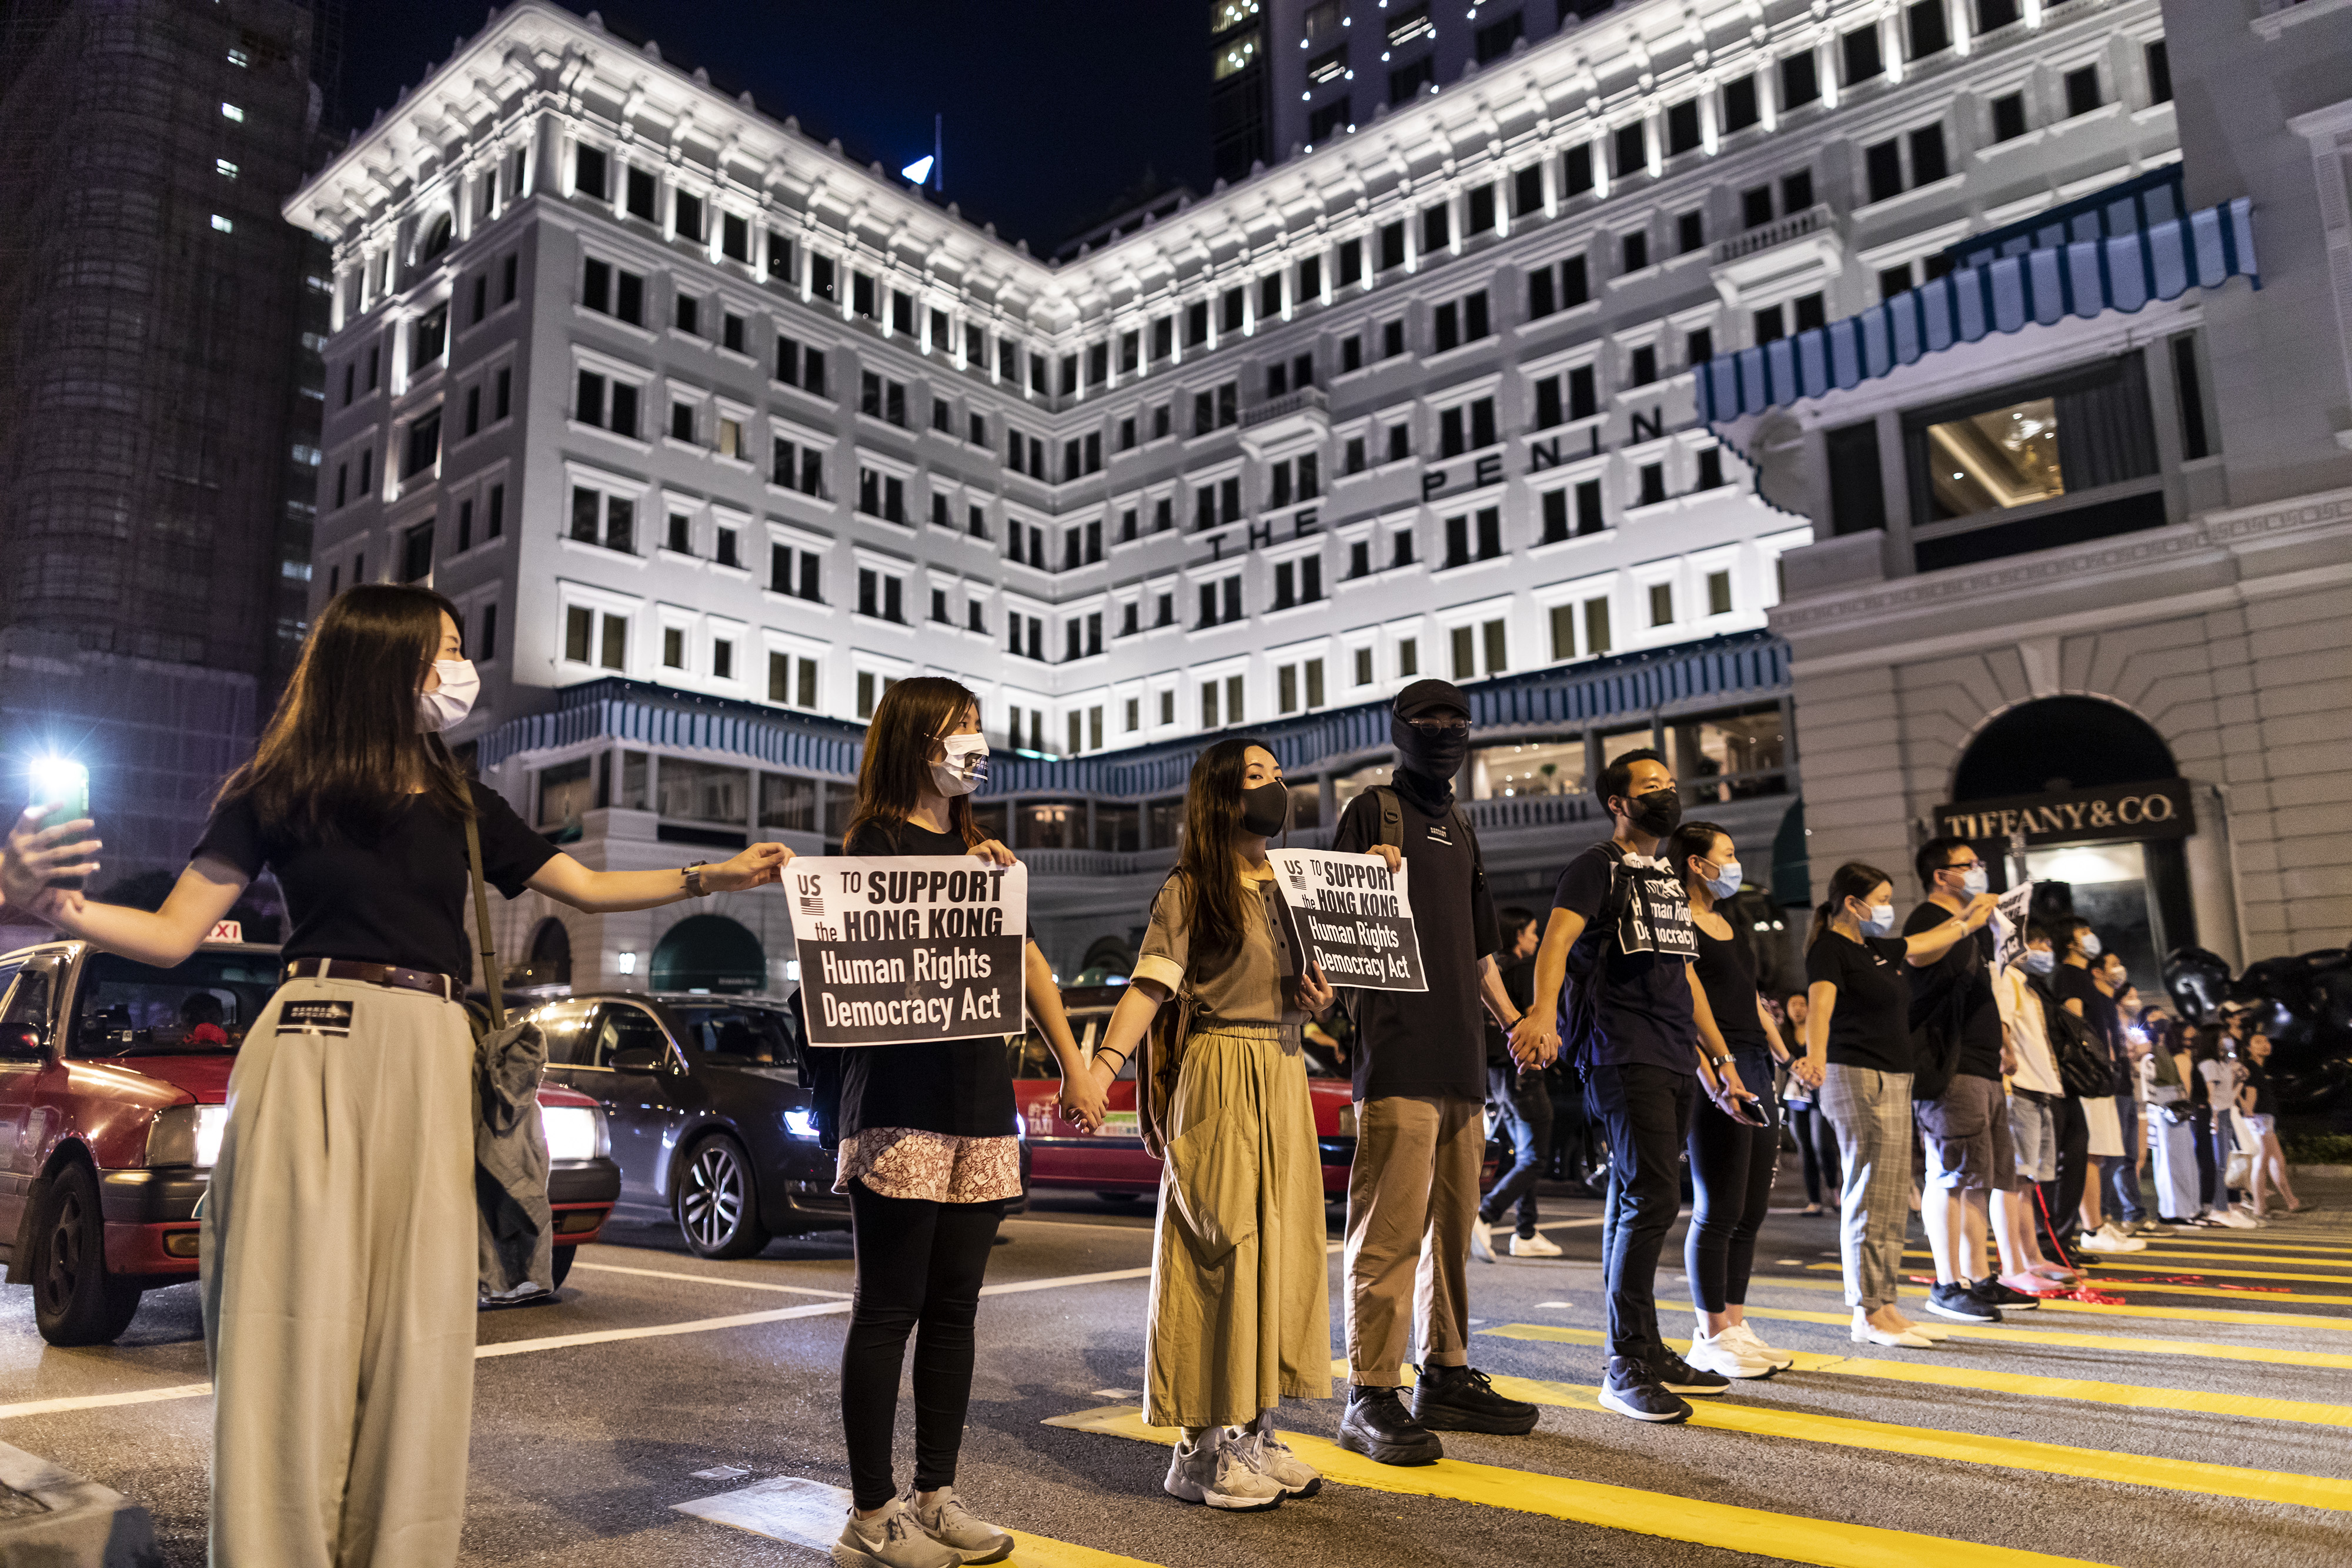 Demonstrators join hands to form a human chain in front of the Peninsula Hotel during the Hong Kong Way event in the Tsim Sha Tsui district of Hong Kong, China, on Friday, Aug. 23, 2019.